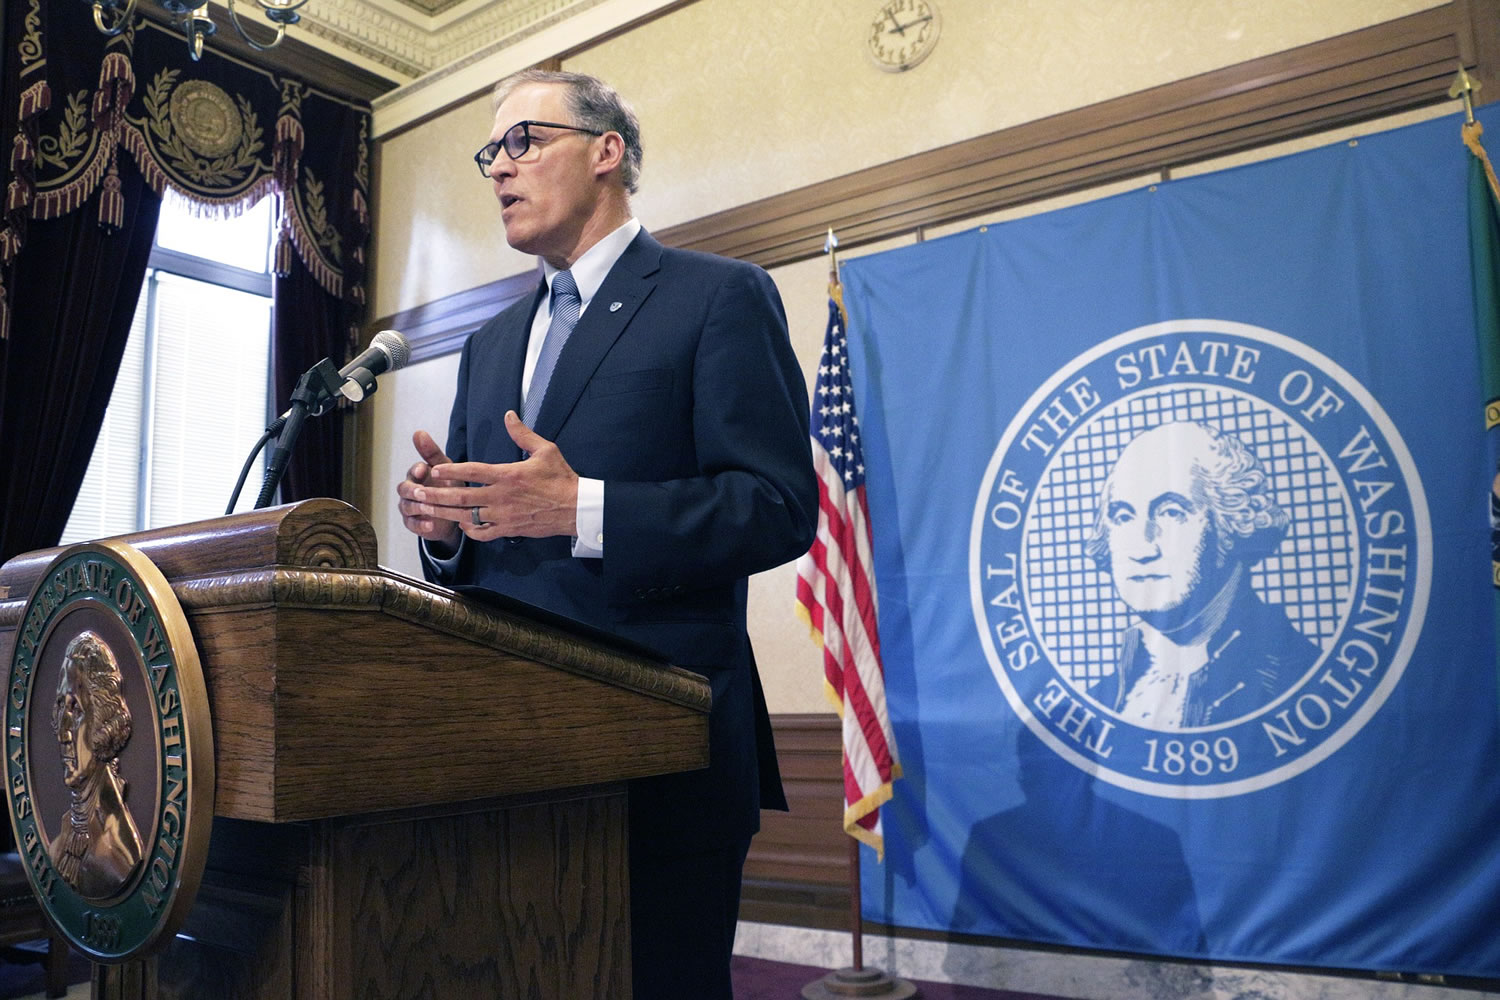 Washington Gov. Jay Inslee talks to the media about the status of ongoing state budget negotiations, Friday, June 19, 2015, in Olympia, Wash. Inslee says new taxes are off the table, and he encouraged the House and Senate to consider closing some tax exemptions as a compromise.